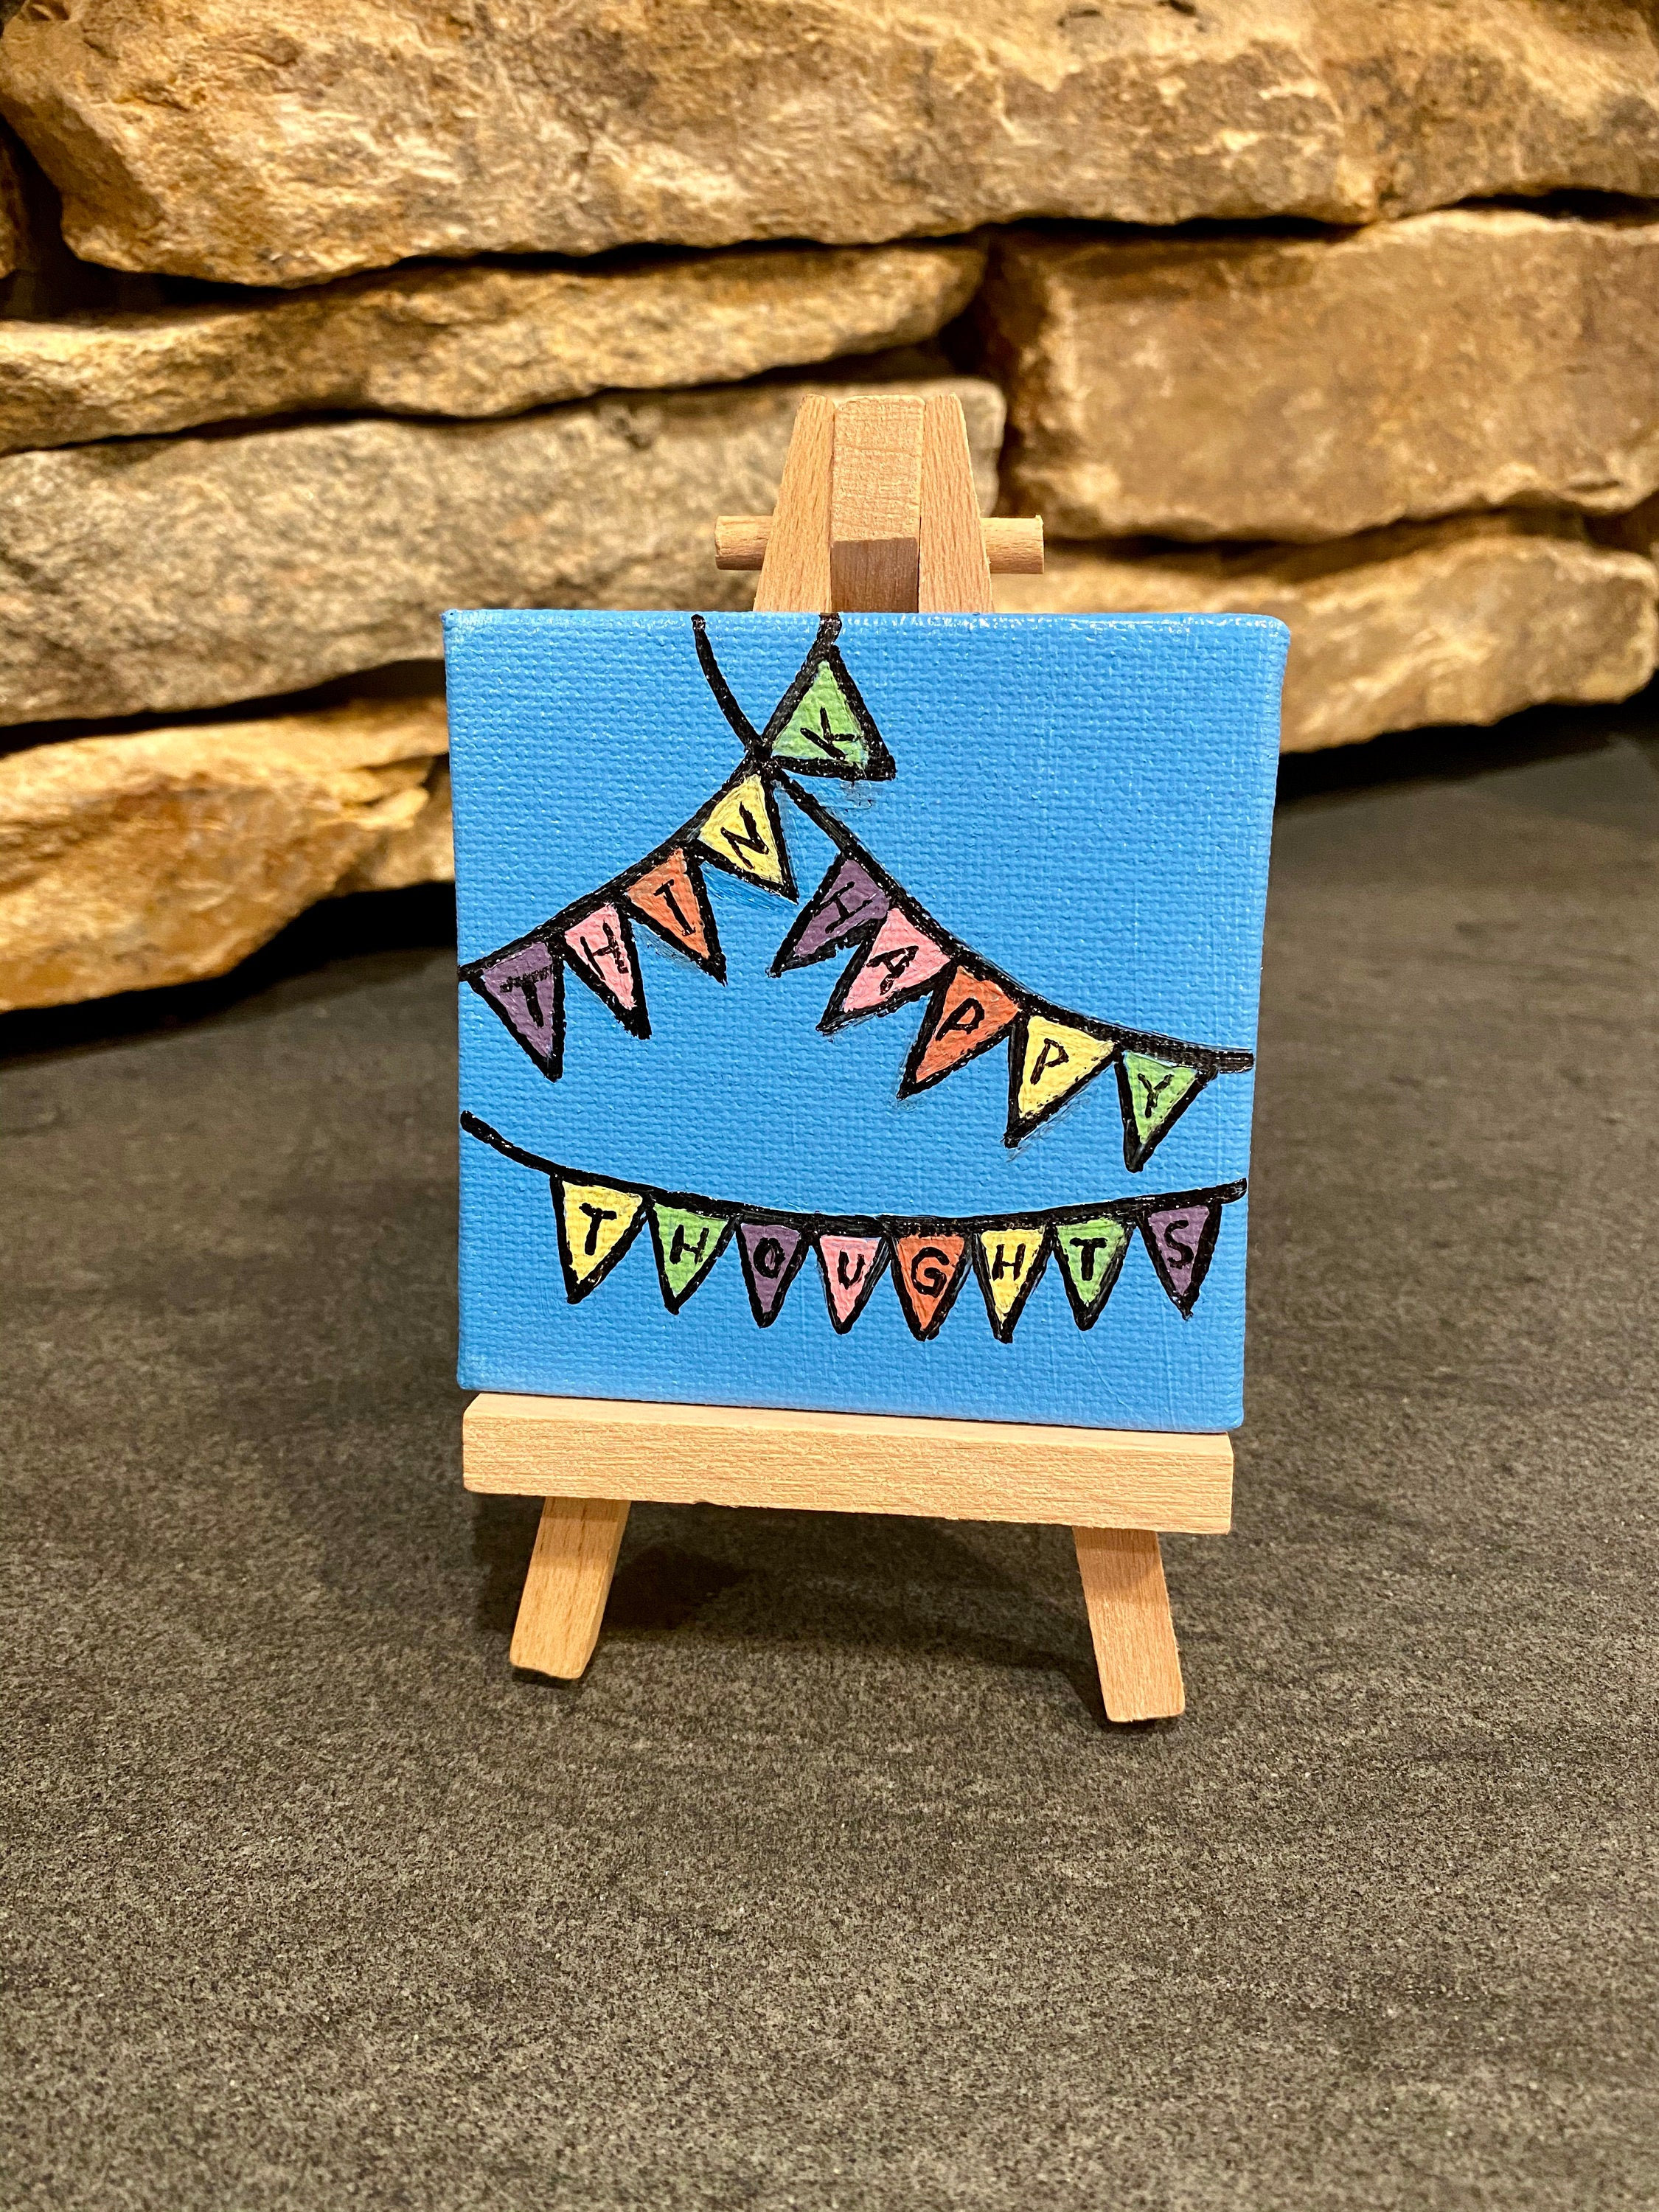 Mini canvas paintings thoughts? : r/painting